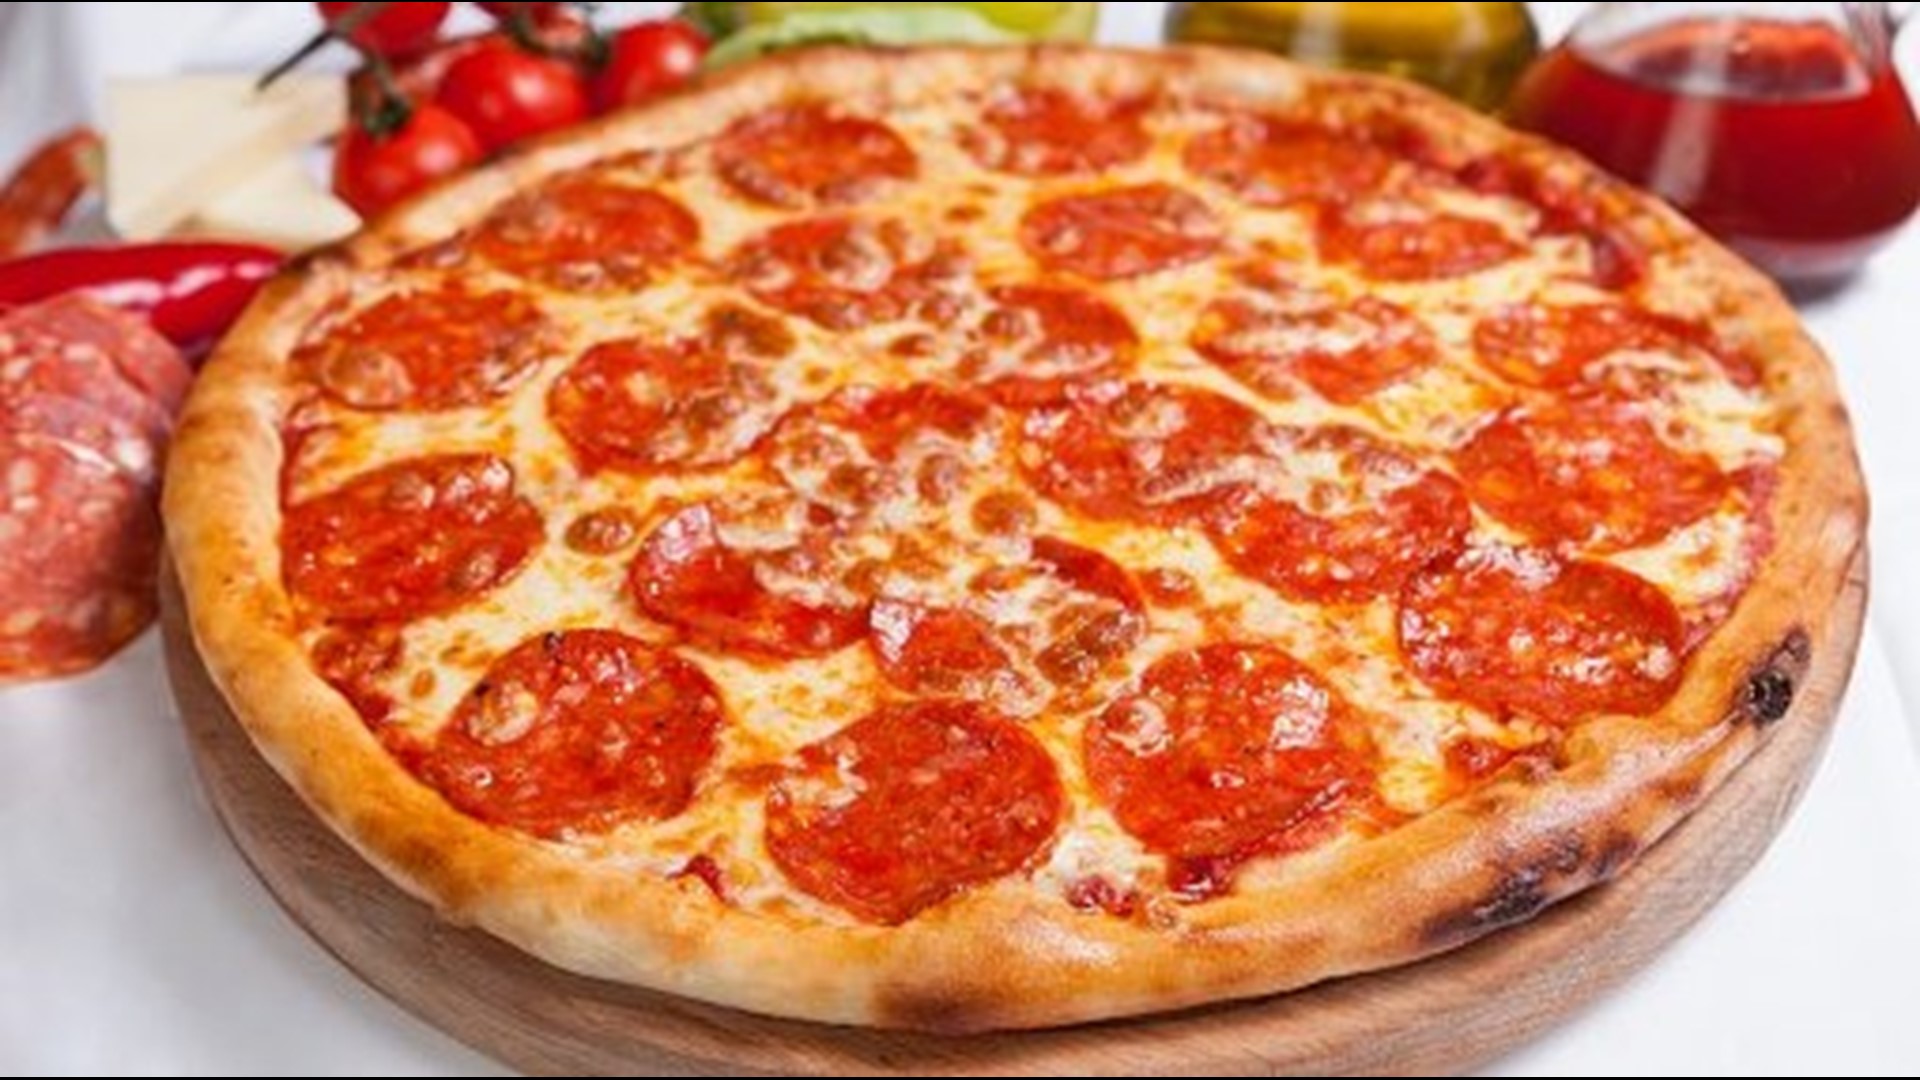 Where to score deals on National Pepperoni Pizza Day